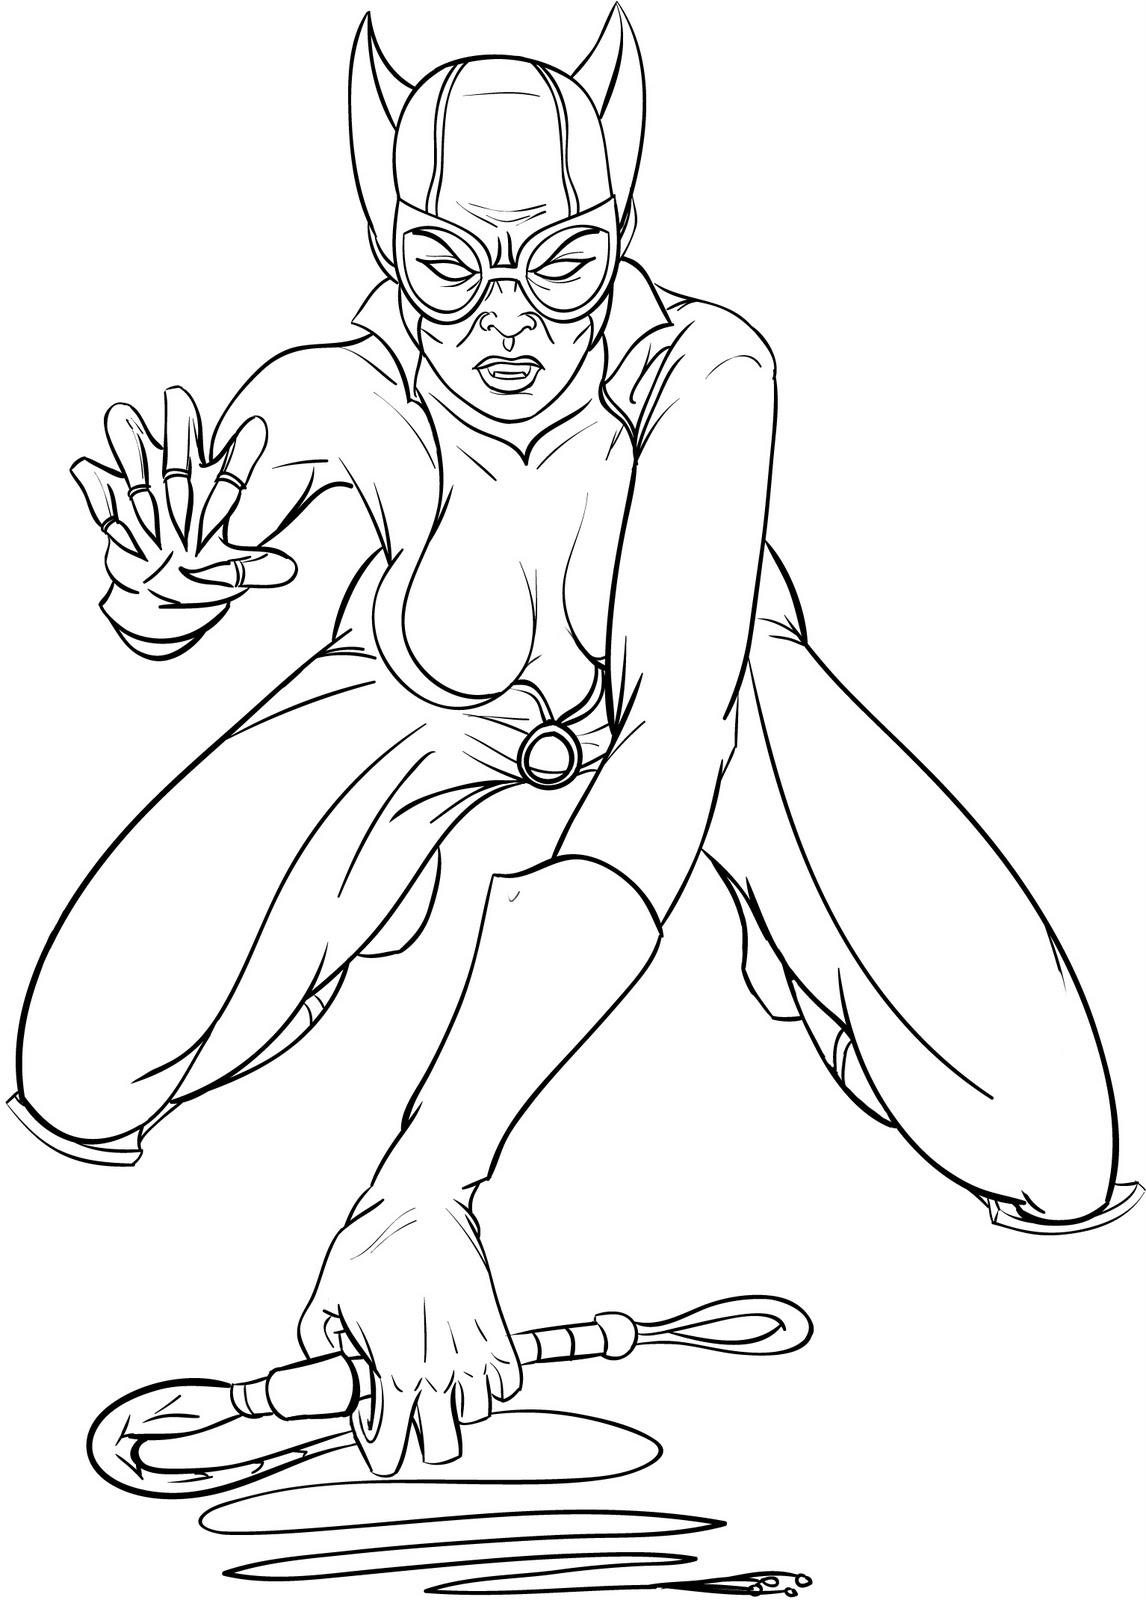 Catwoman Coloring Pages Free.